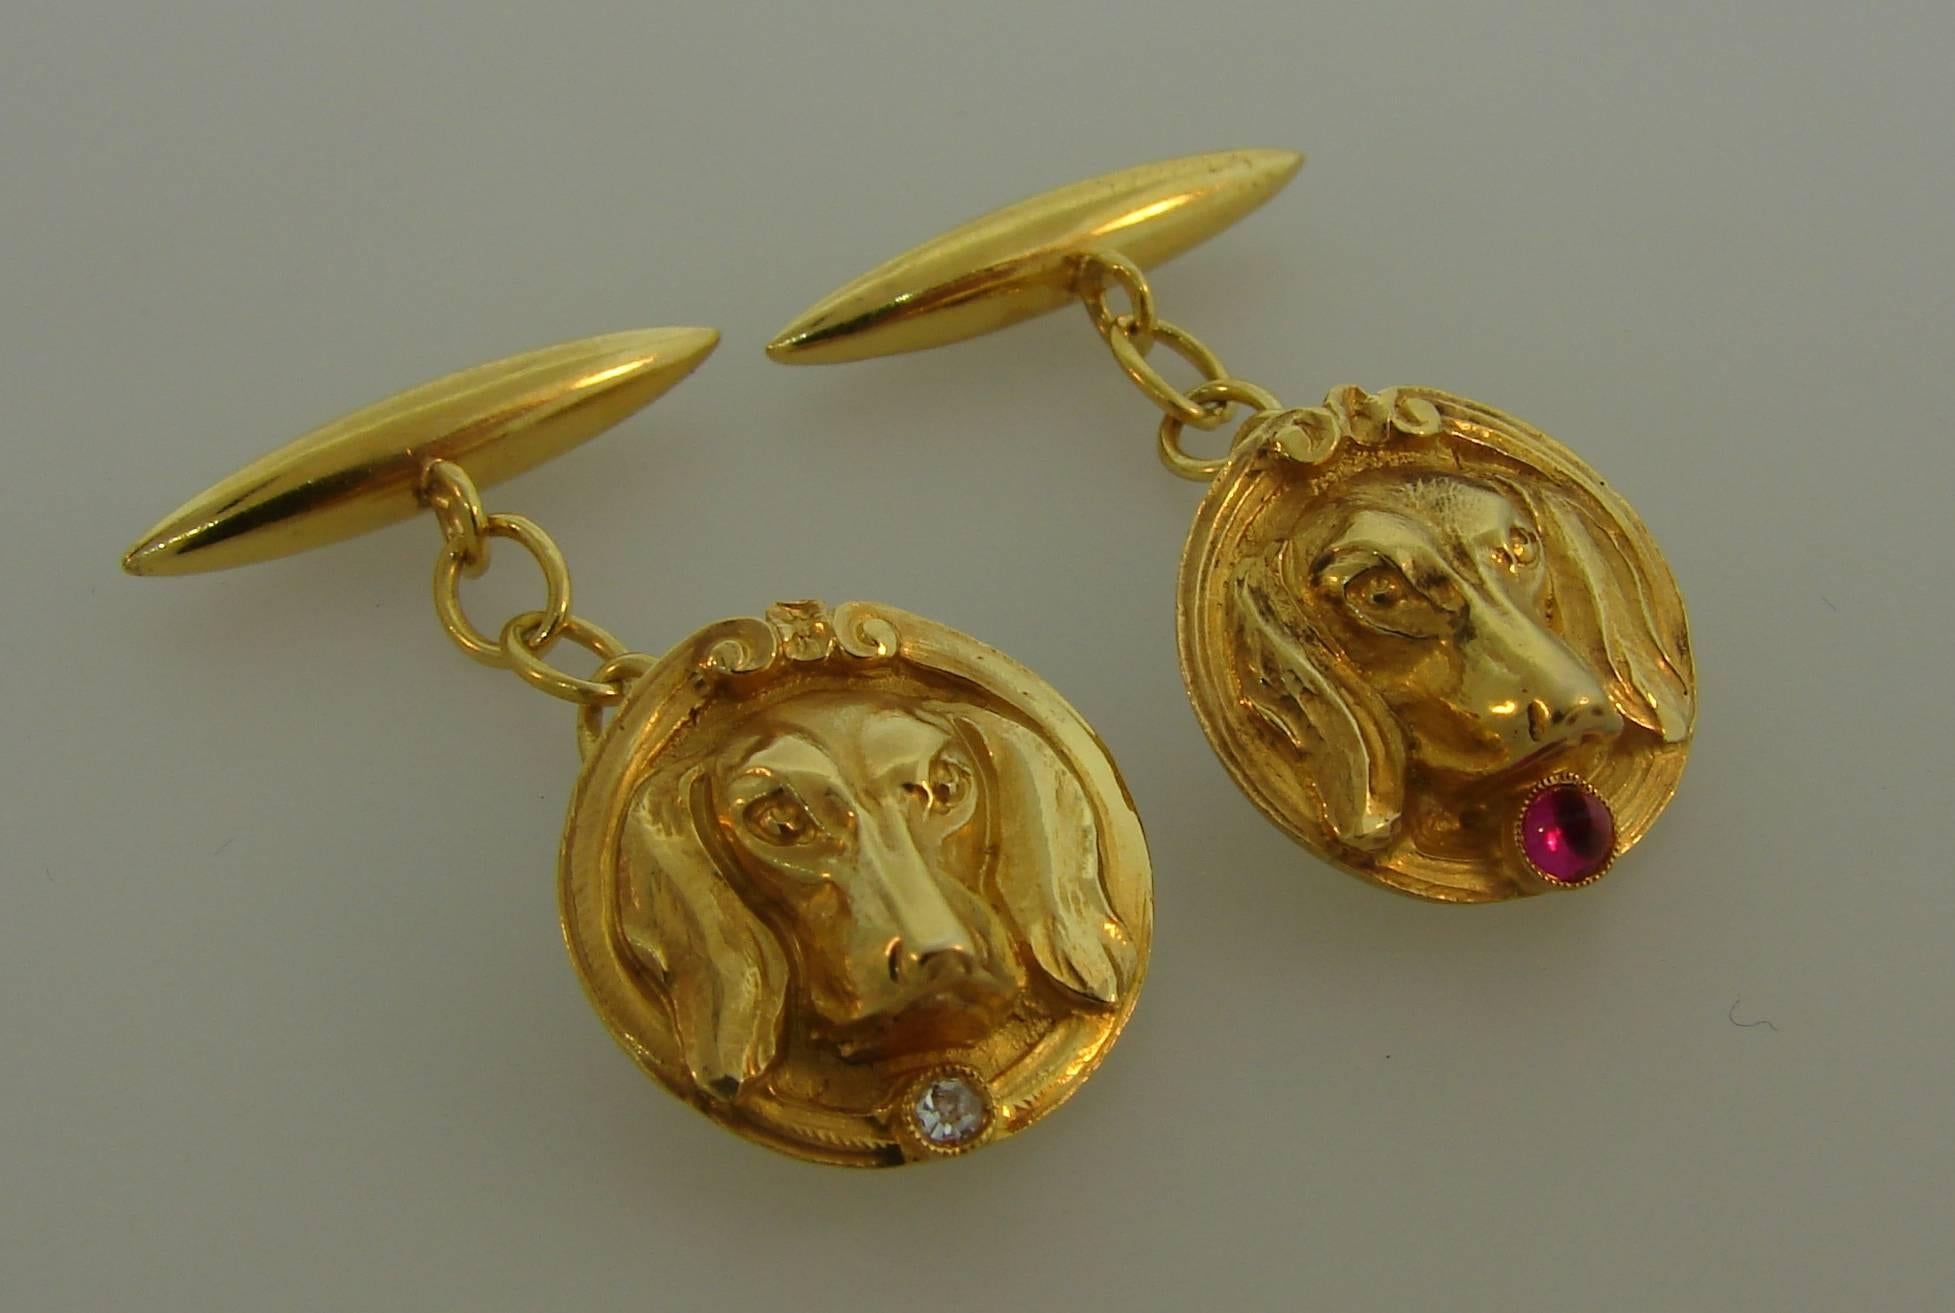 Cute and fun dachshund dog cufflinks. Elegant and wearable, the cufflinks are a great addition to your jewelry and accessories collection. 
Made of 18 karat (stamped) yellow gold and accented with old mine cut diamond and cabochon ruby.
The